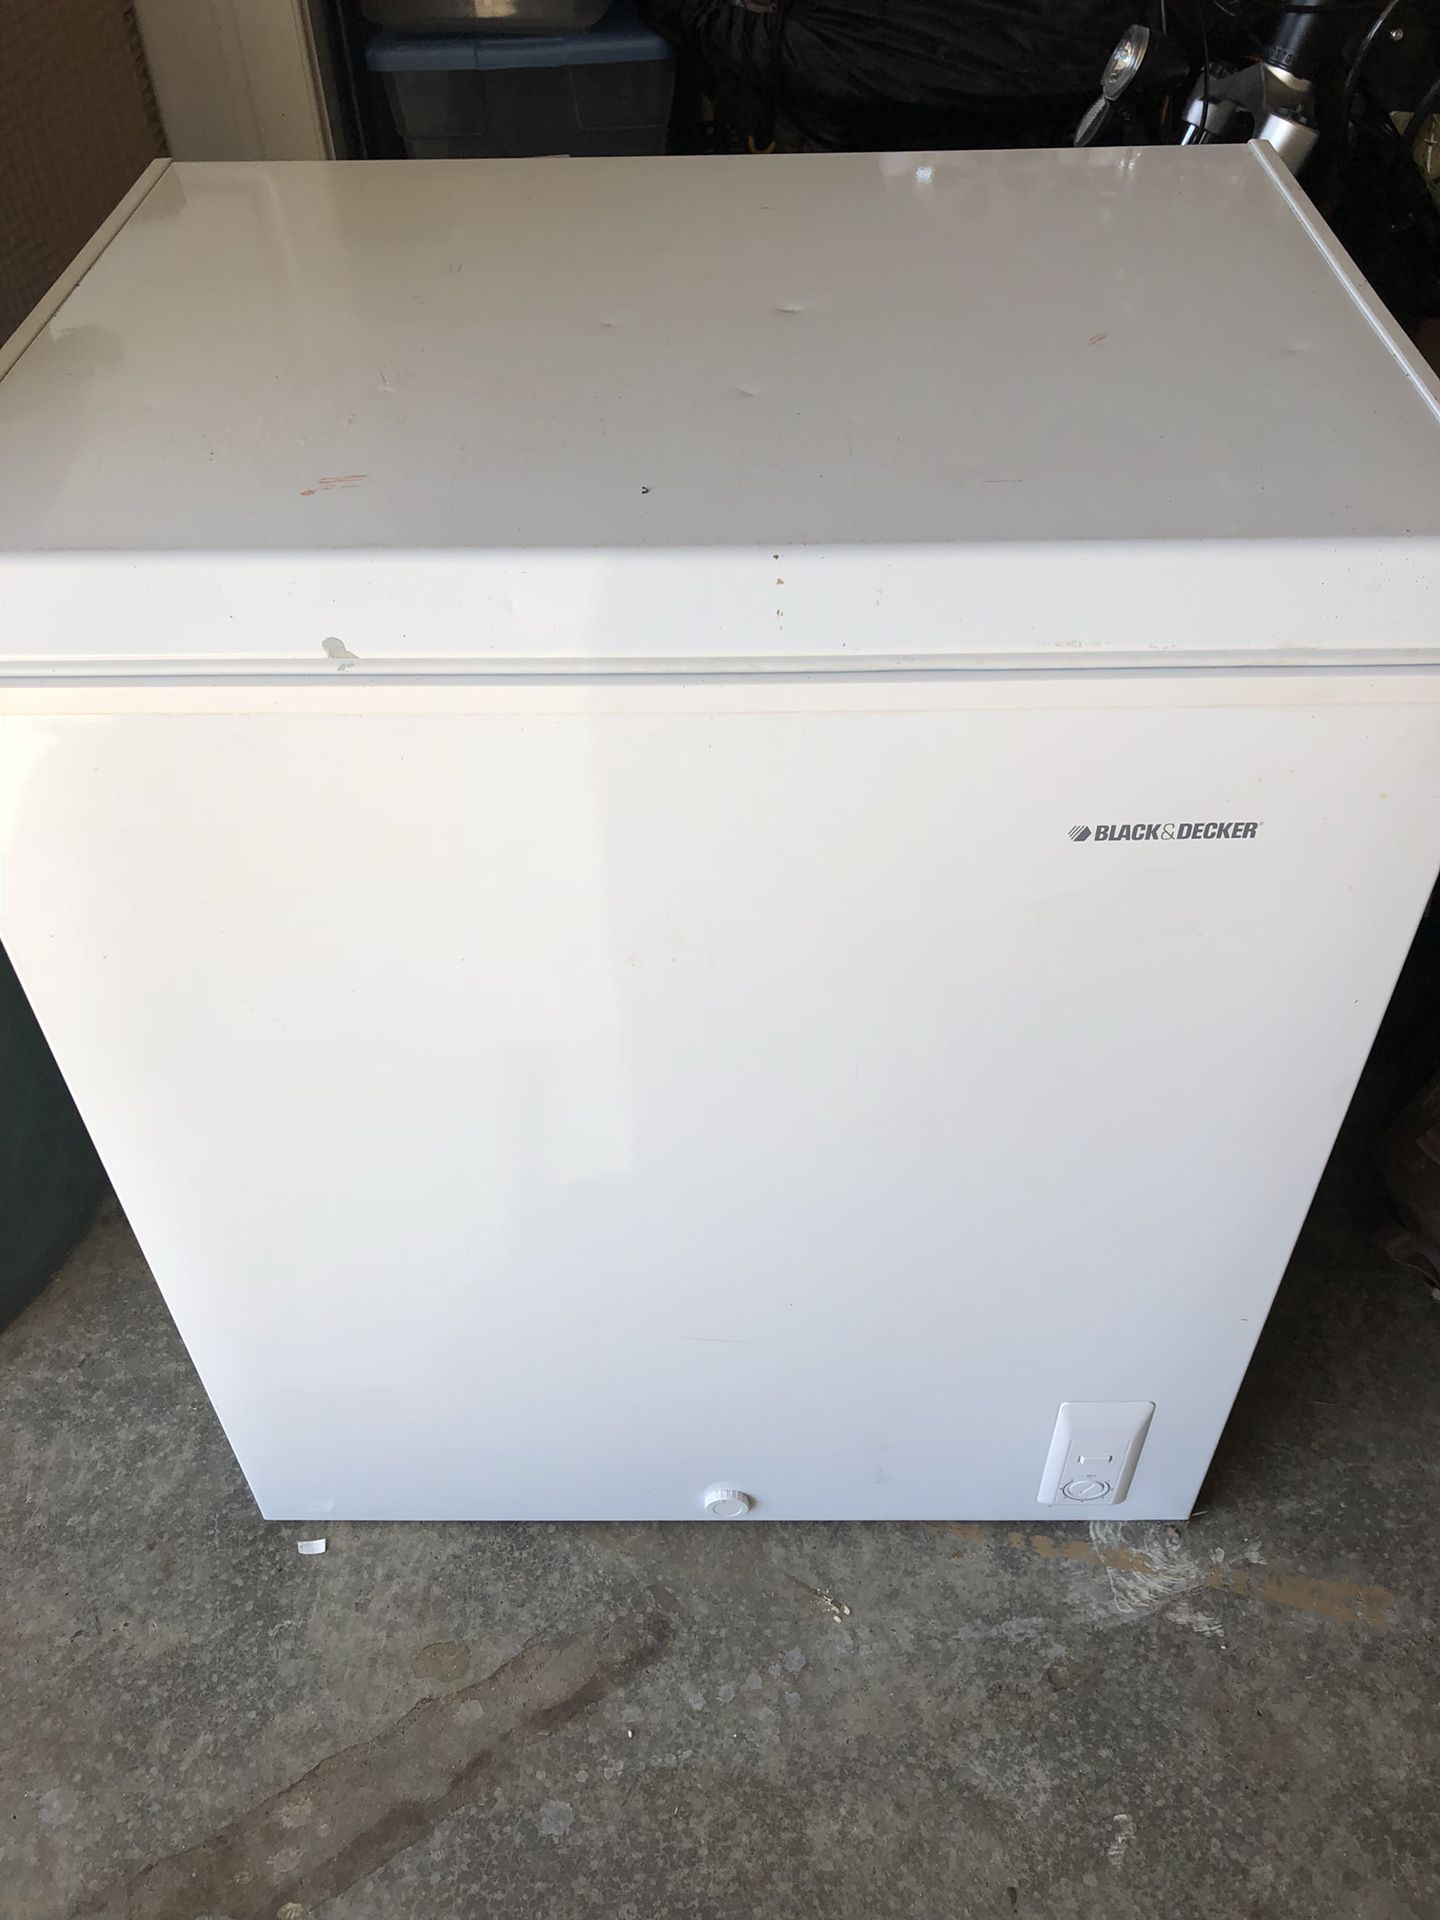 Black and Decker BFQ50 Freezer for Sale in Lacey, WA - OfferUp